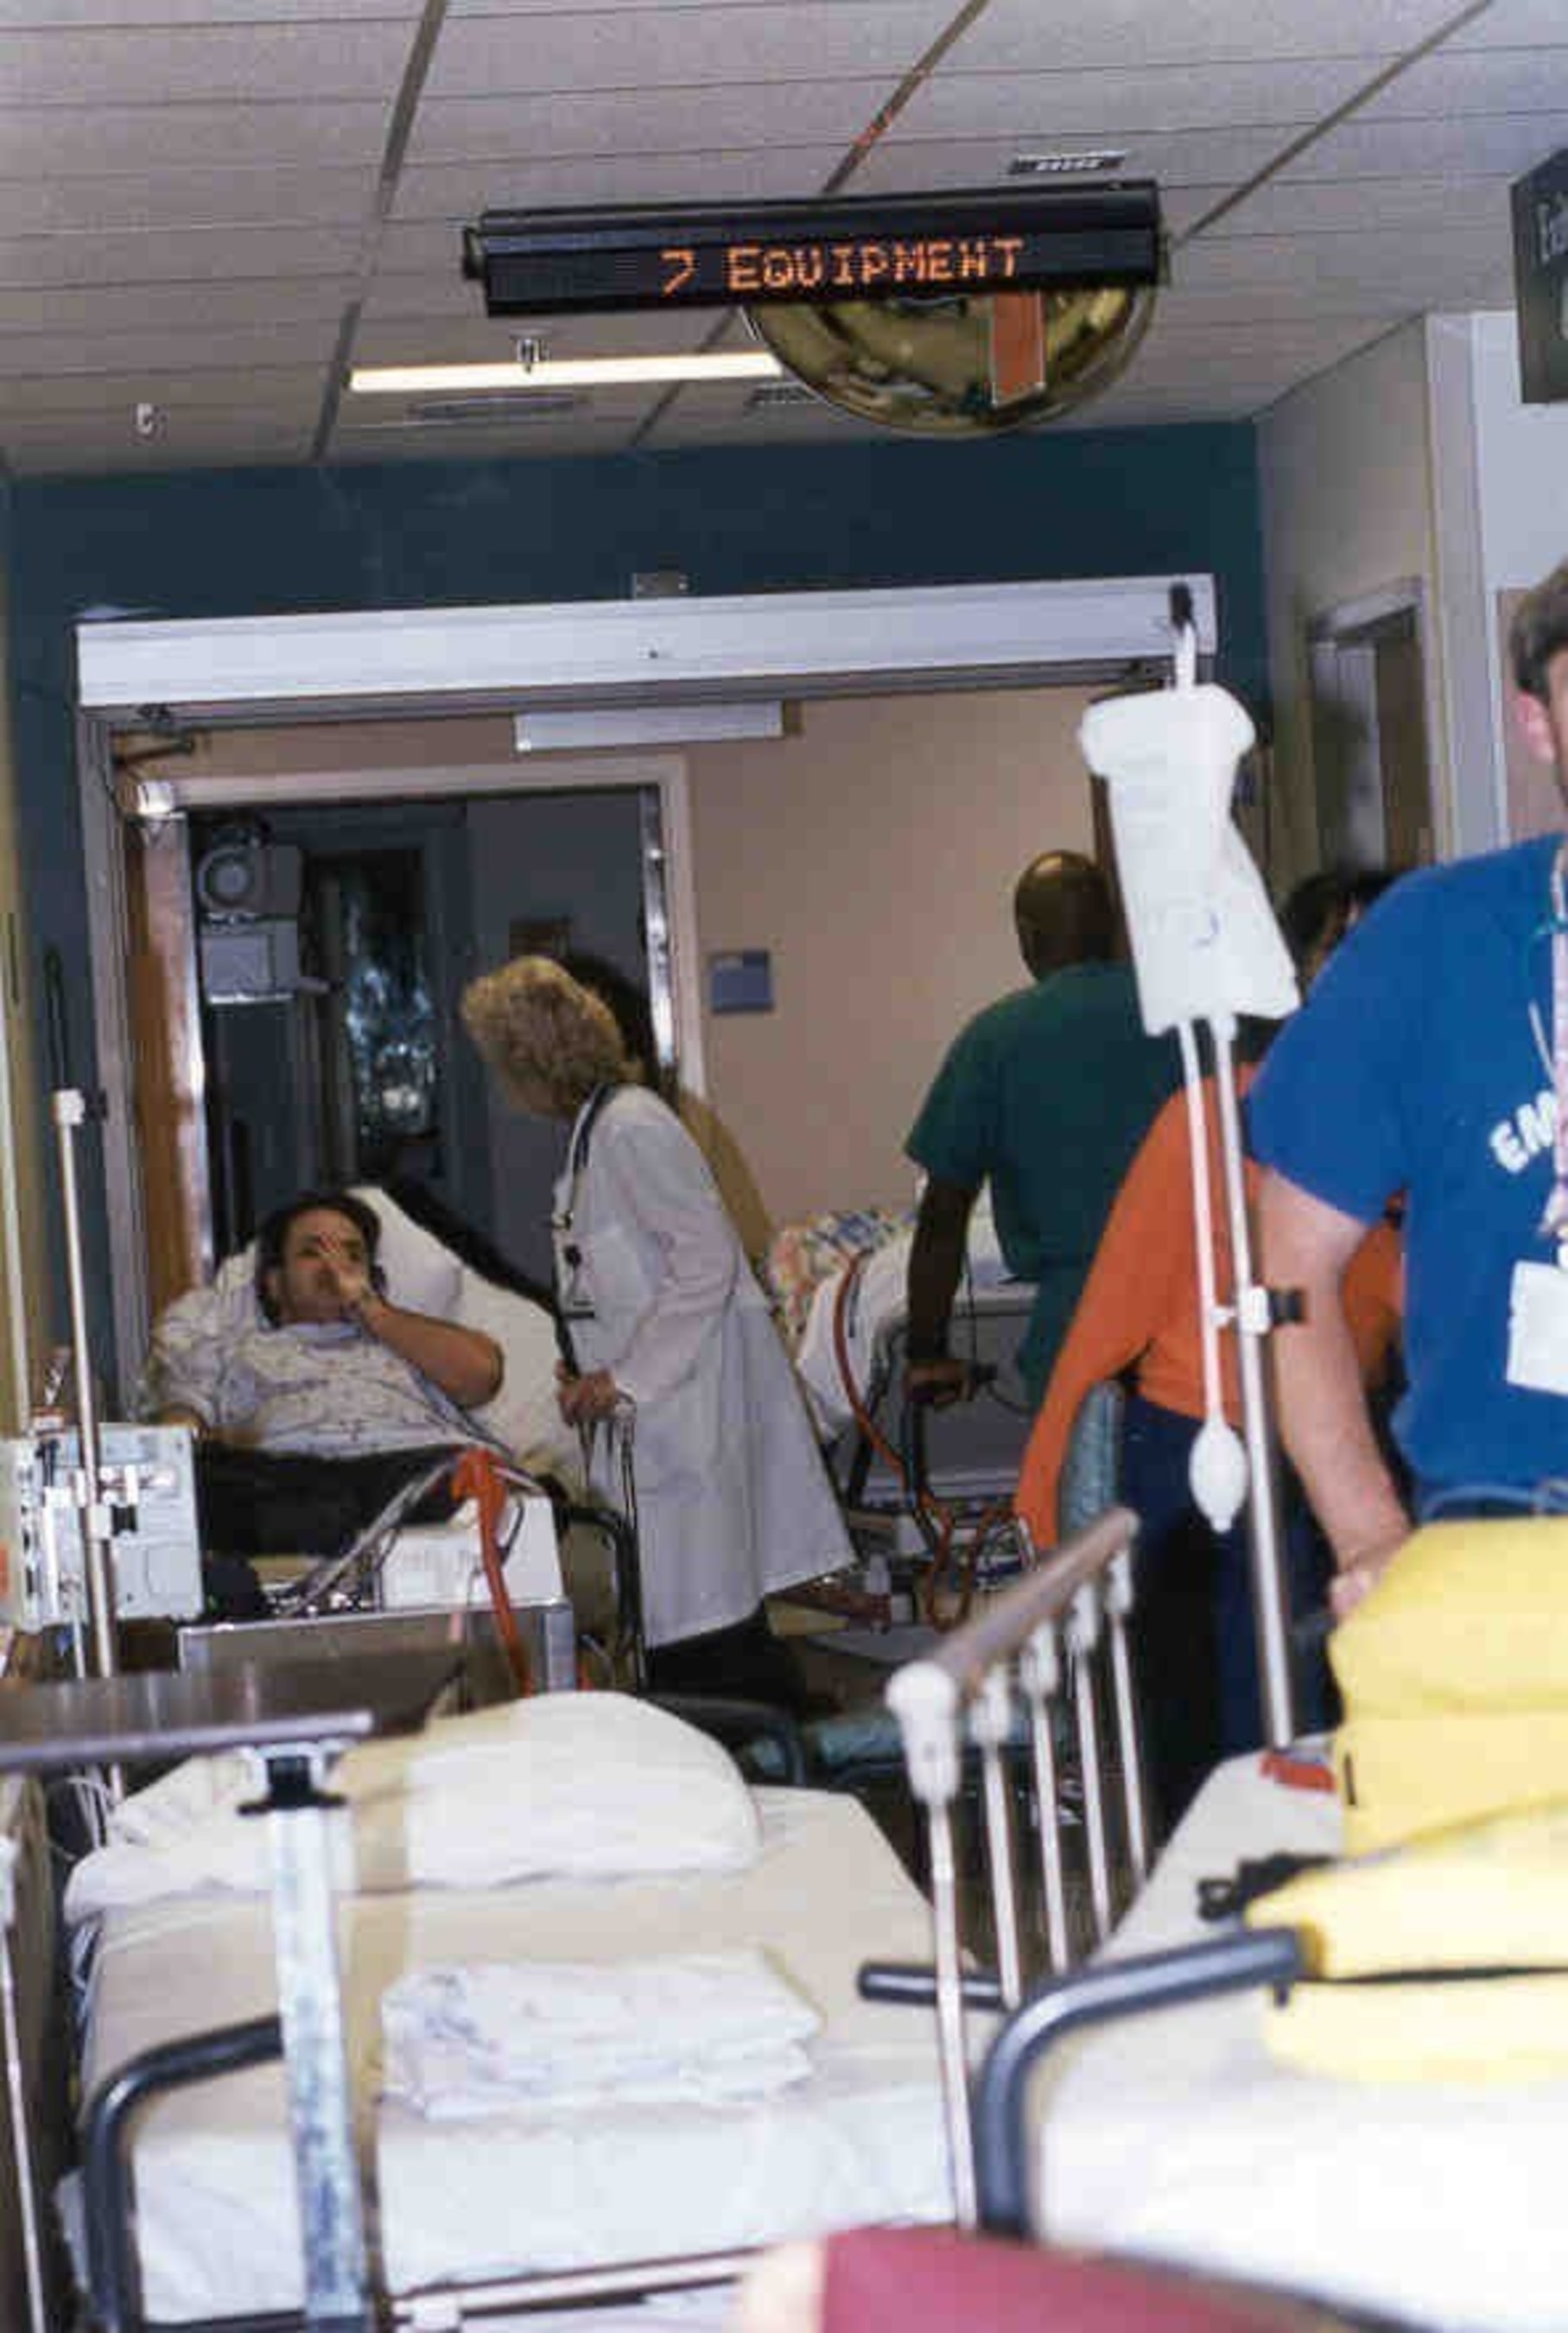 Psychiatric patients wait in emergency department hallways for hours, even days, for an inpatient bed.